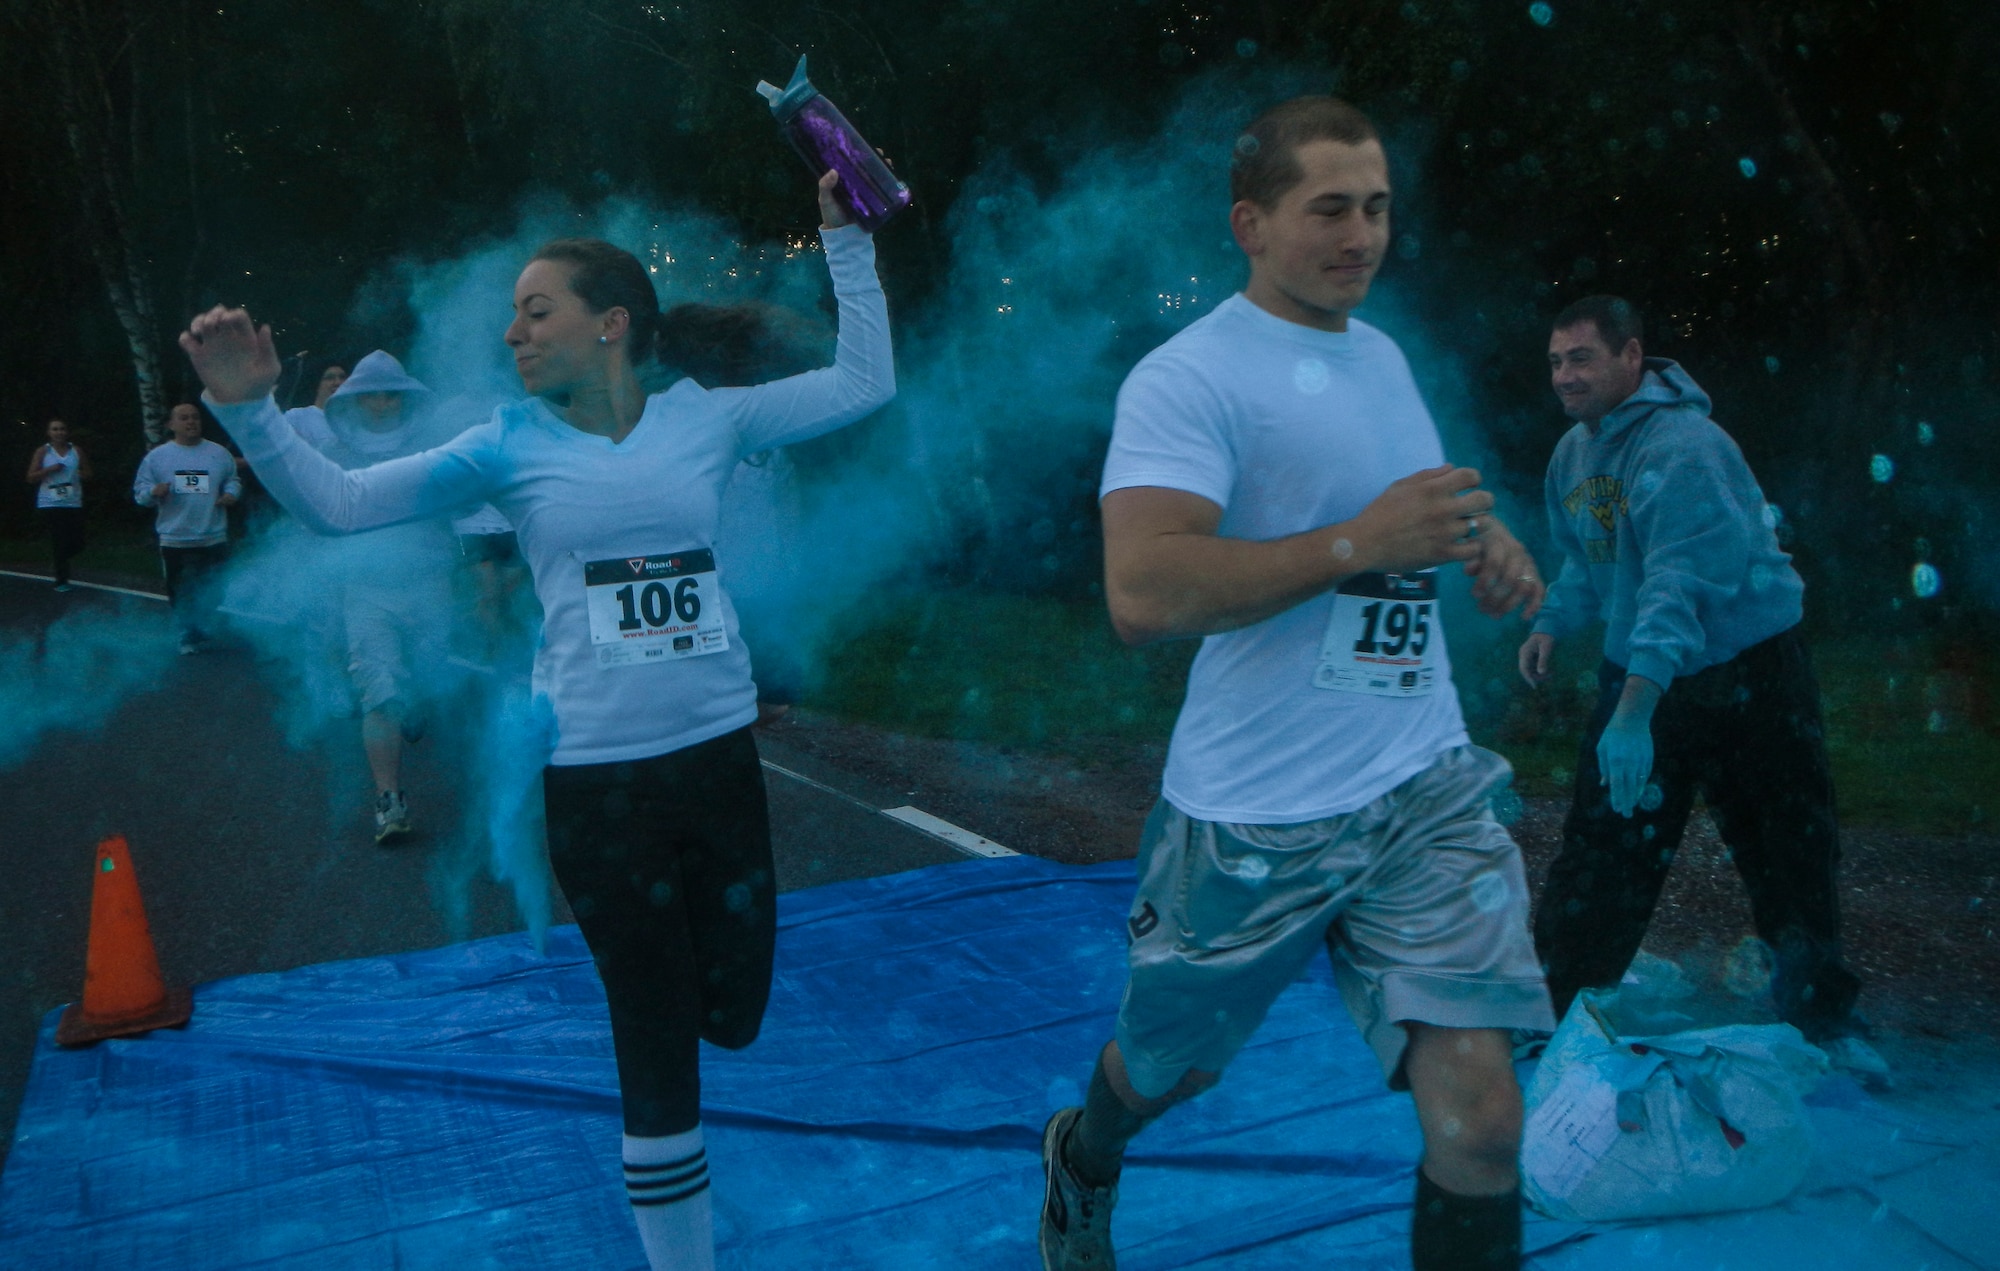 Participants are showered in color Aug. 21, 2014, during the Diversity Day 5K Color Run at Spangdahlem Air Base, Germany. More than 100 people participated in the color run to kick off Diversity Day. (U.S. Air Force photo by Staff Sgt. Christopher Ruano/Released)